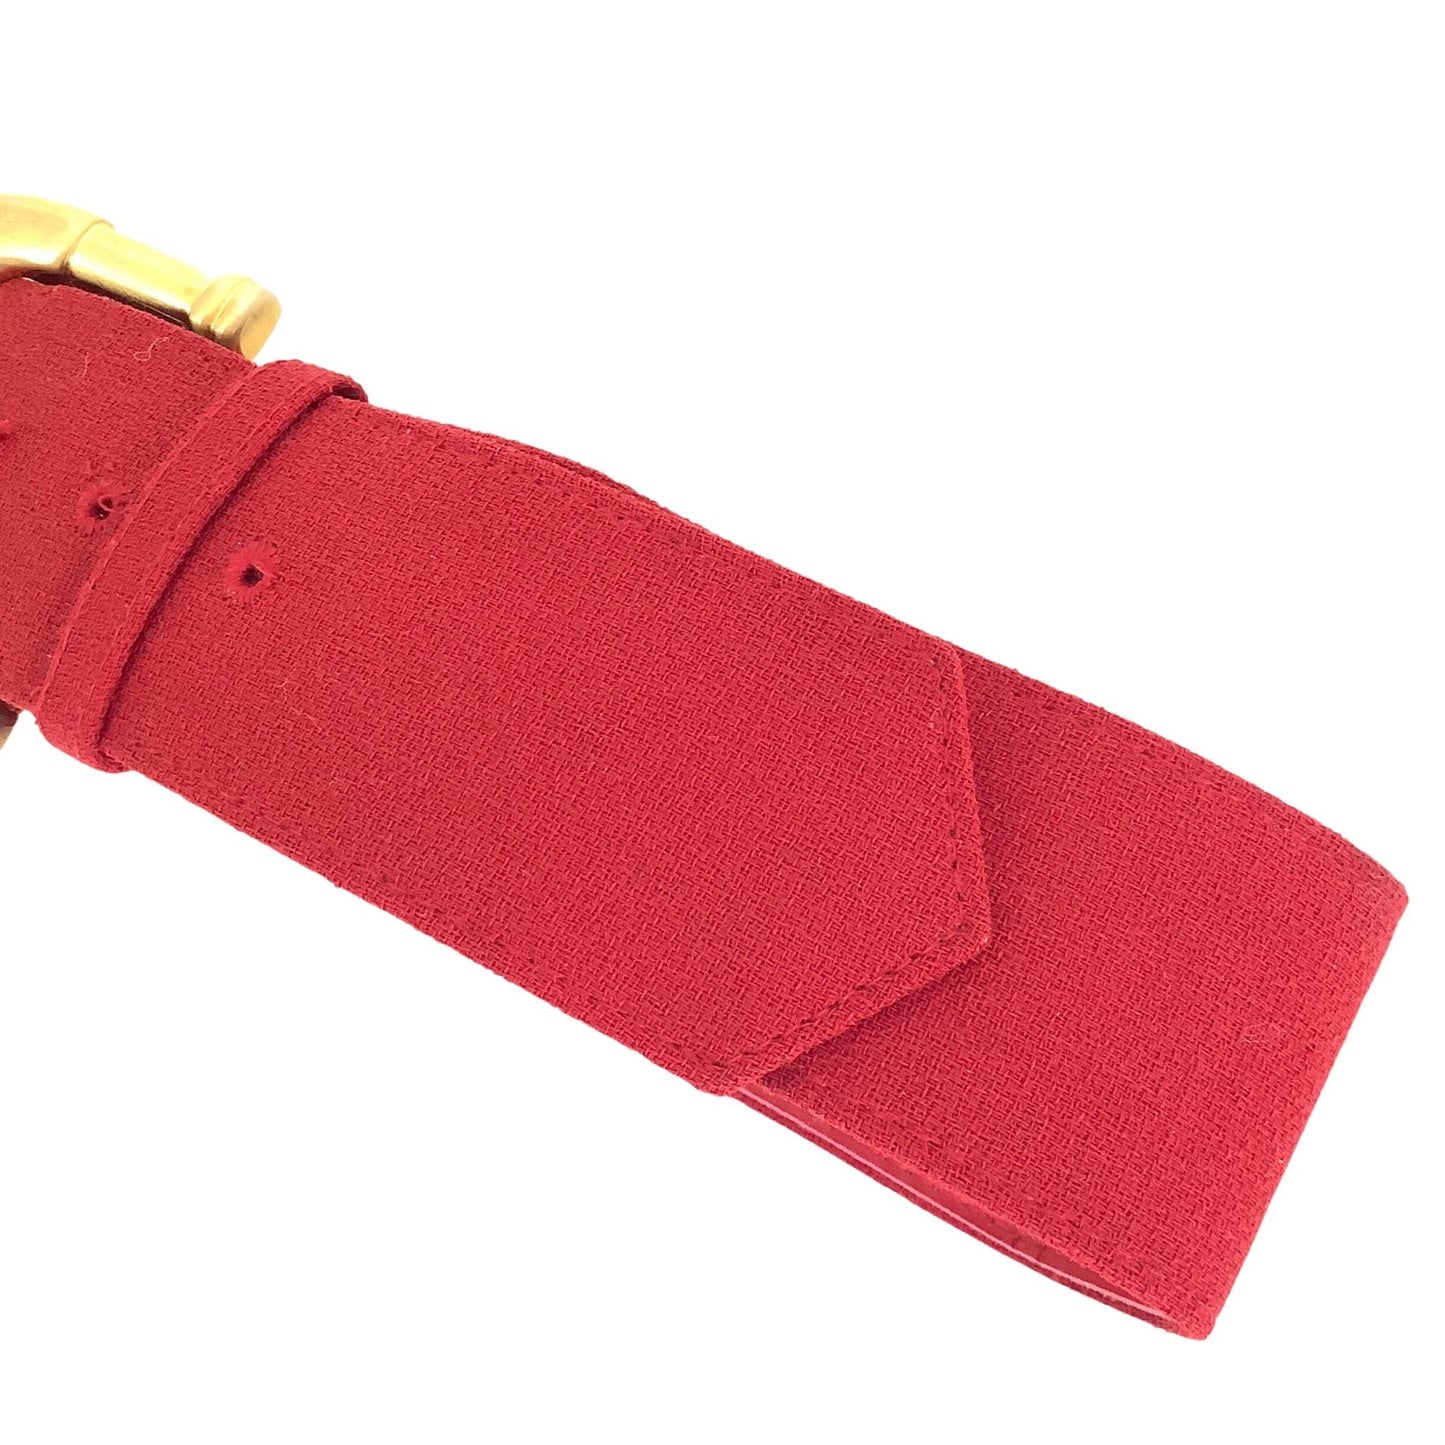 1970s Red Fabric Belt Extra Small / Red / Vintage 1970s